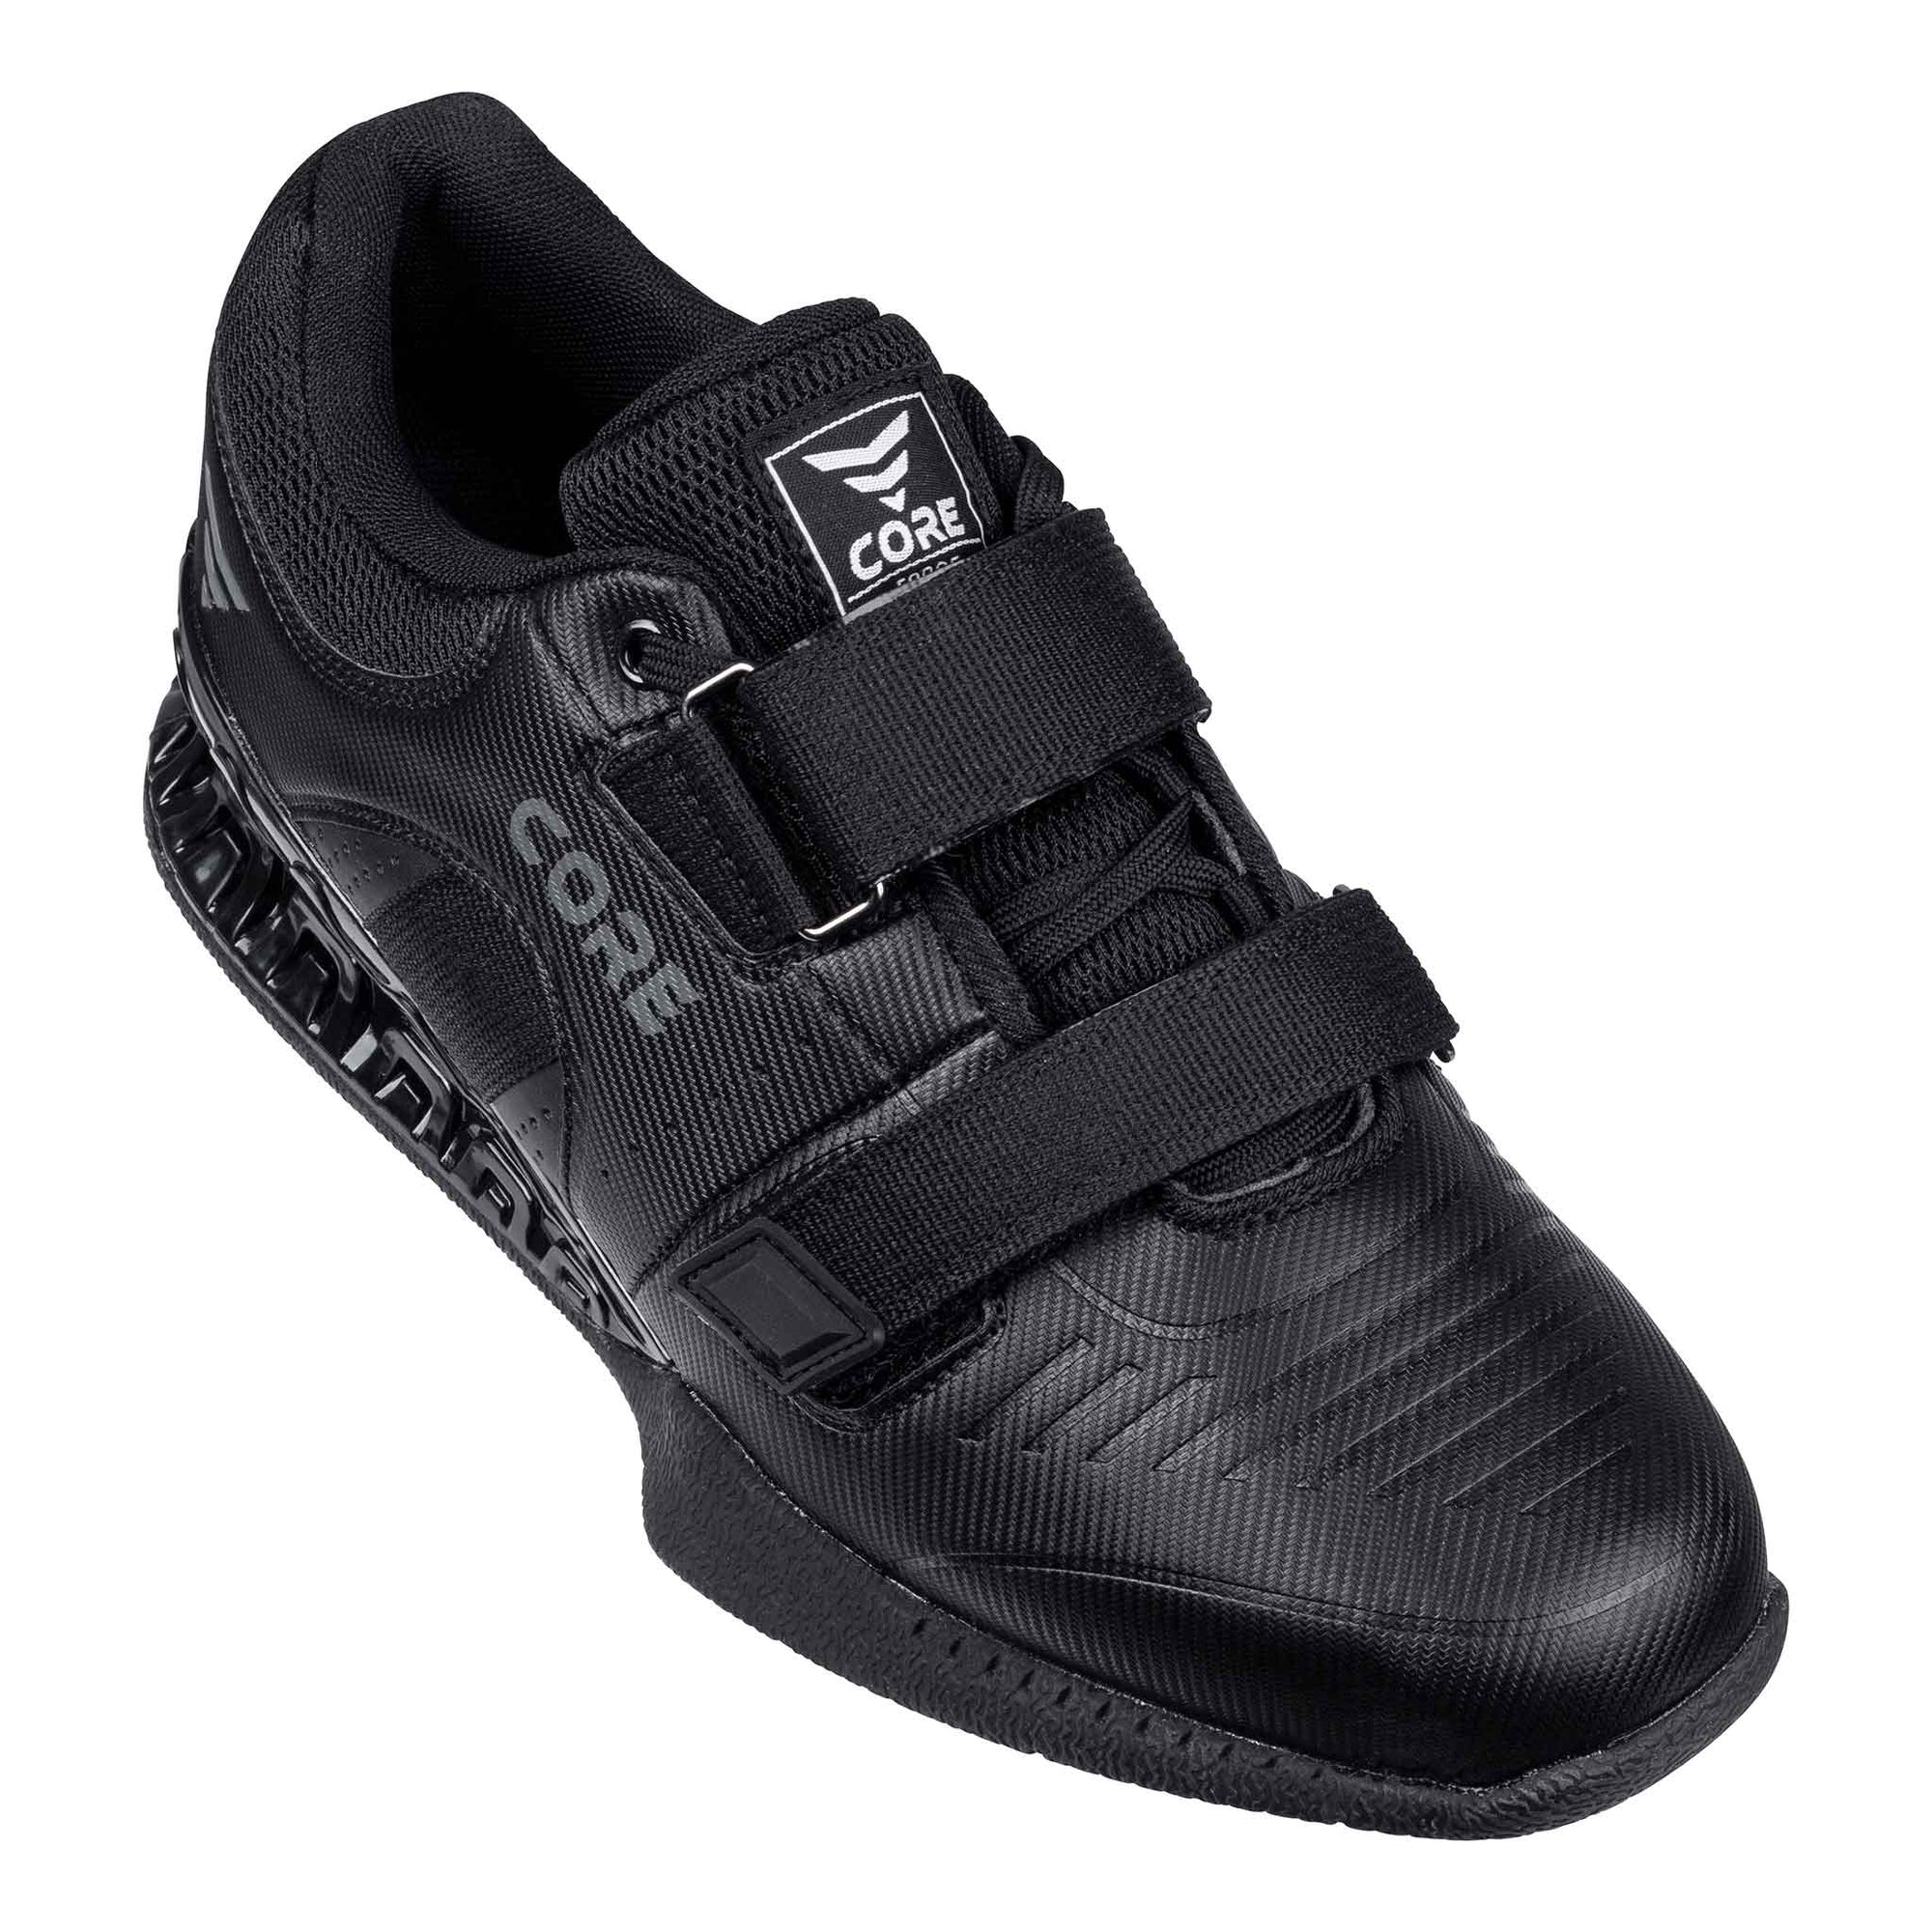 Nordcore Weightlifting Shoes Force Black